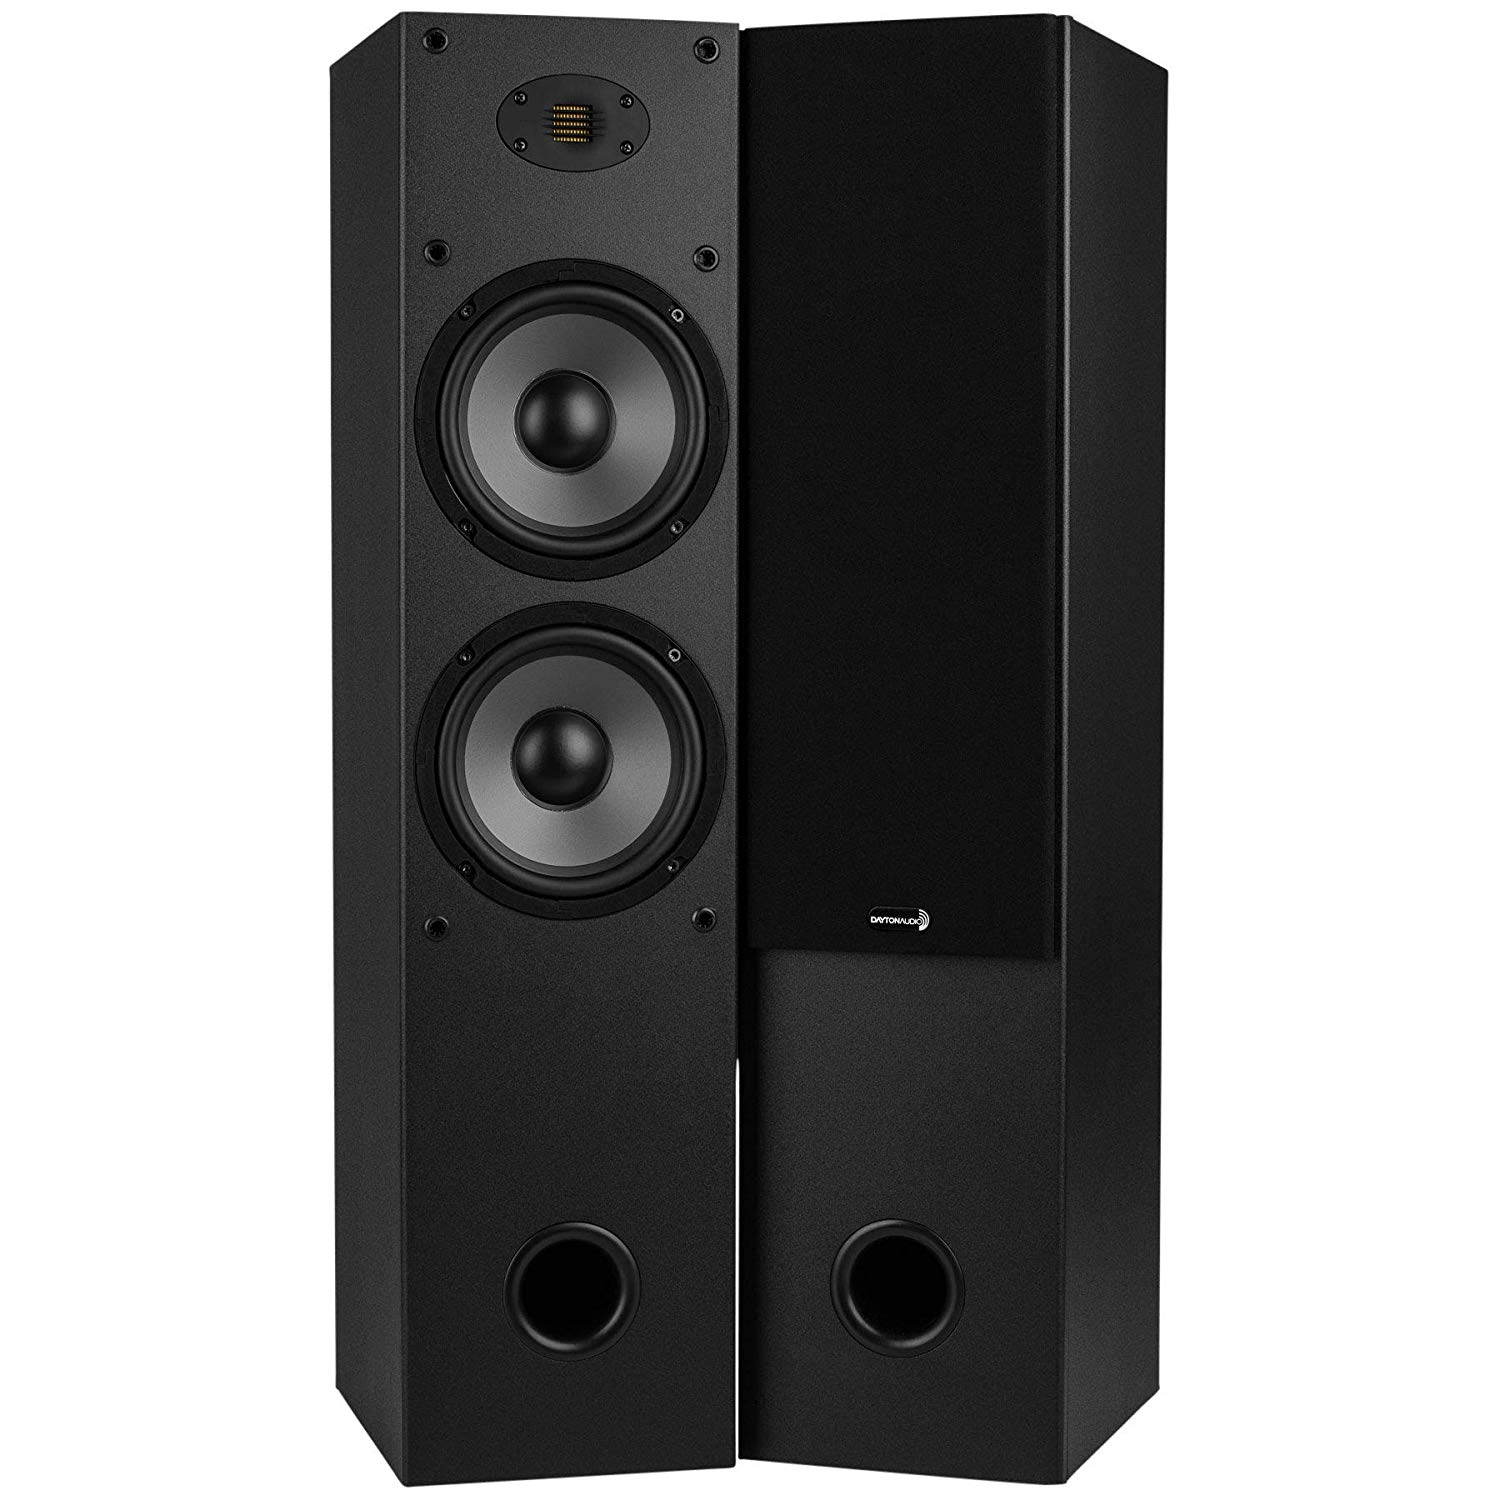 The 10 Best Tower Speakers in 2022 Reviews Guide